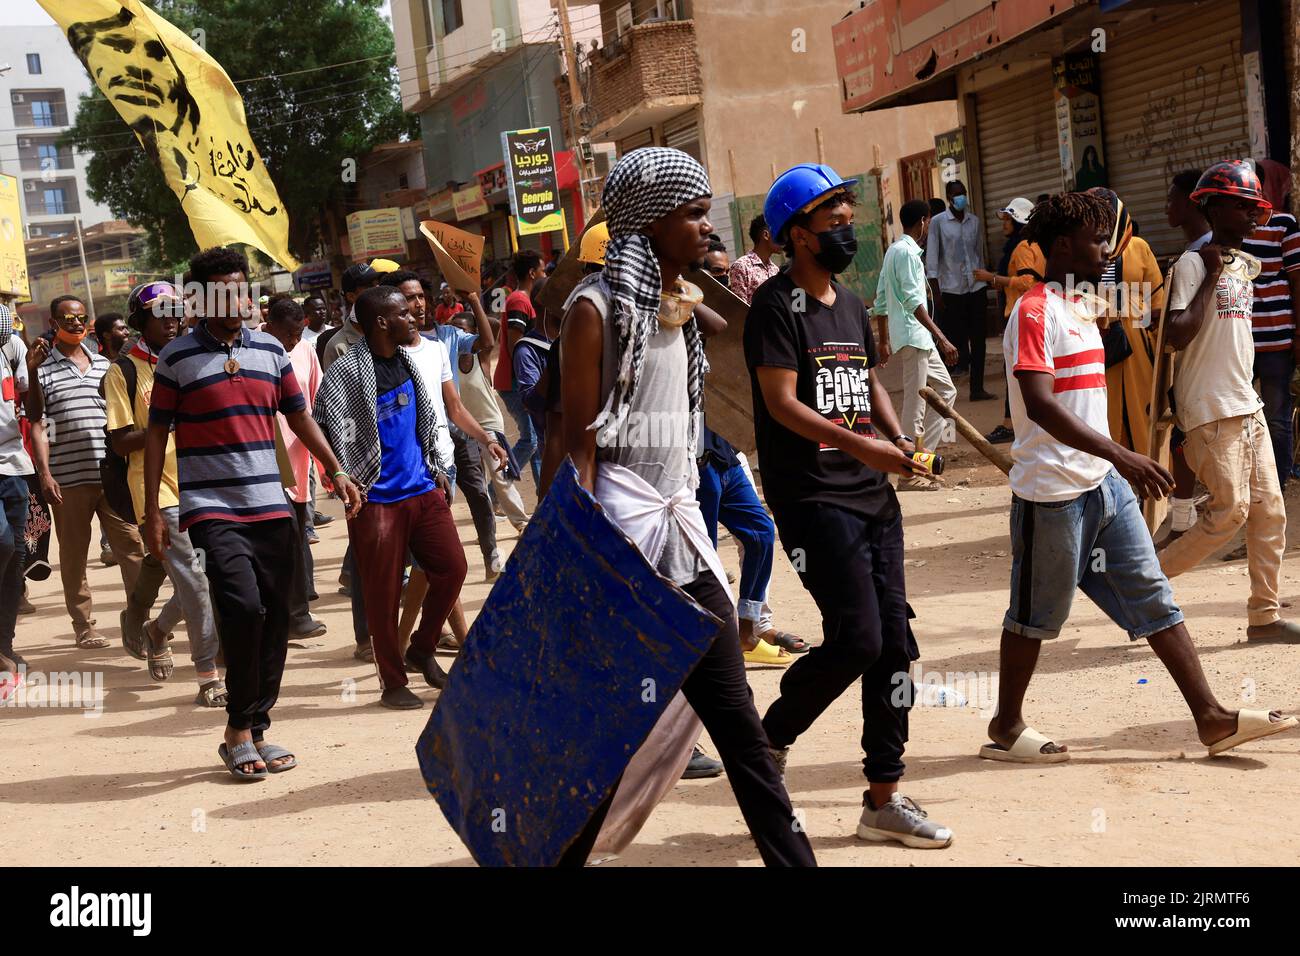 Demonstrators, some holding makeshift shields, march during at a rally against military rule following the last coup, in Khartoum, Sudan August 25, 2022. REUTERS/Mohamed Nureldin Abdallah Stock Photo